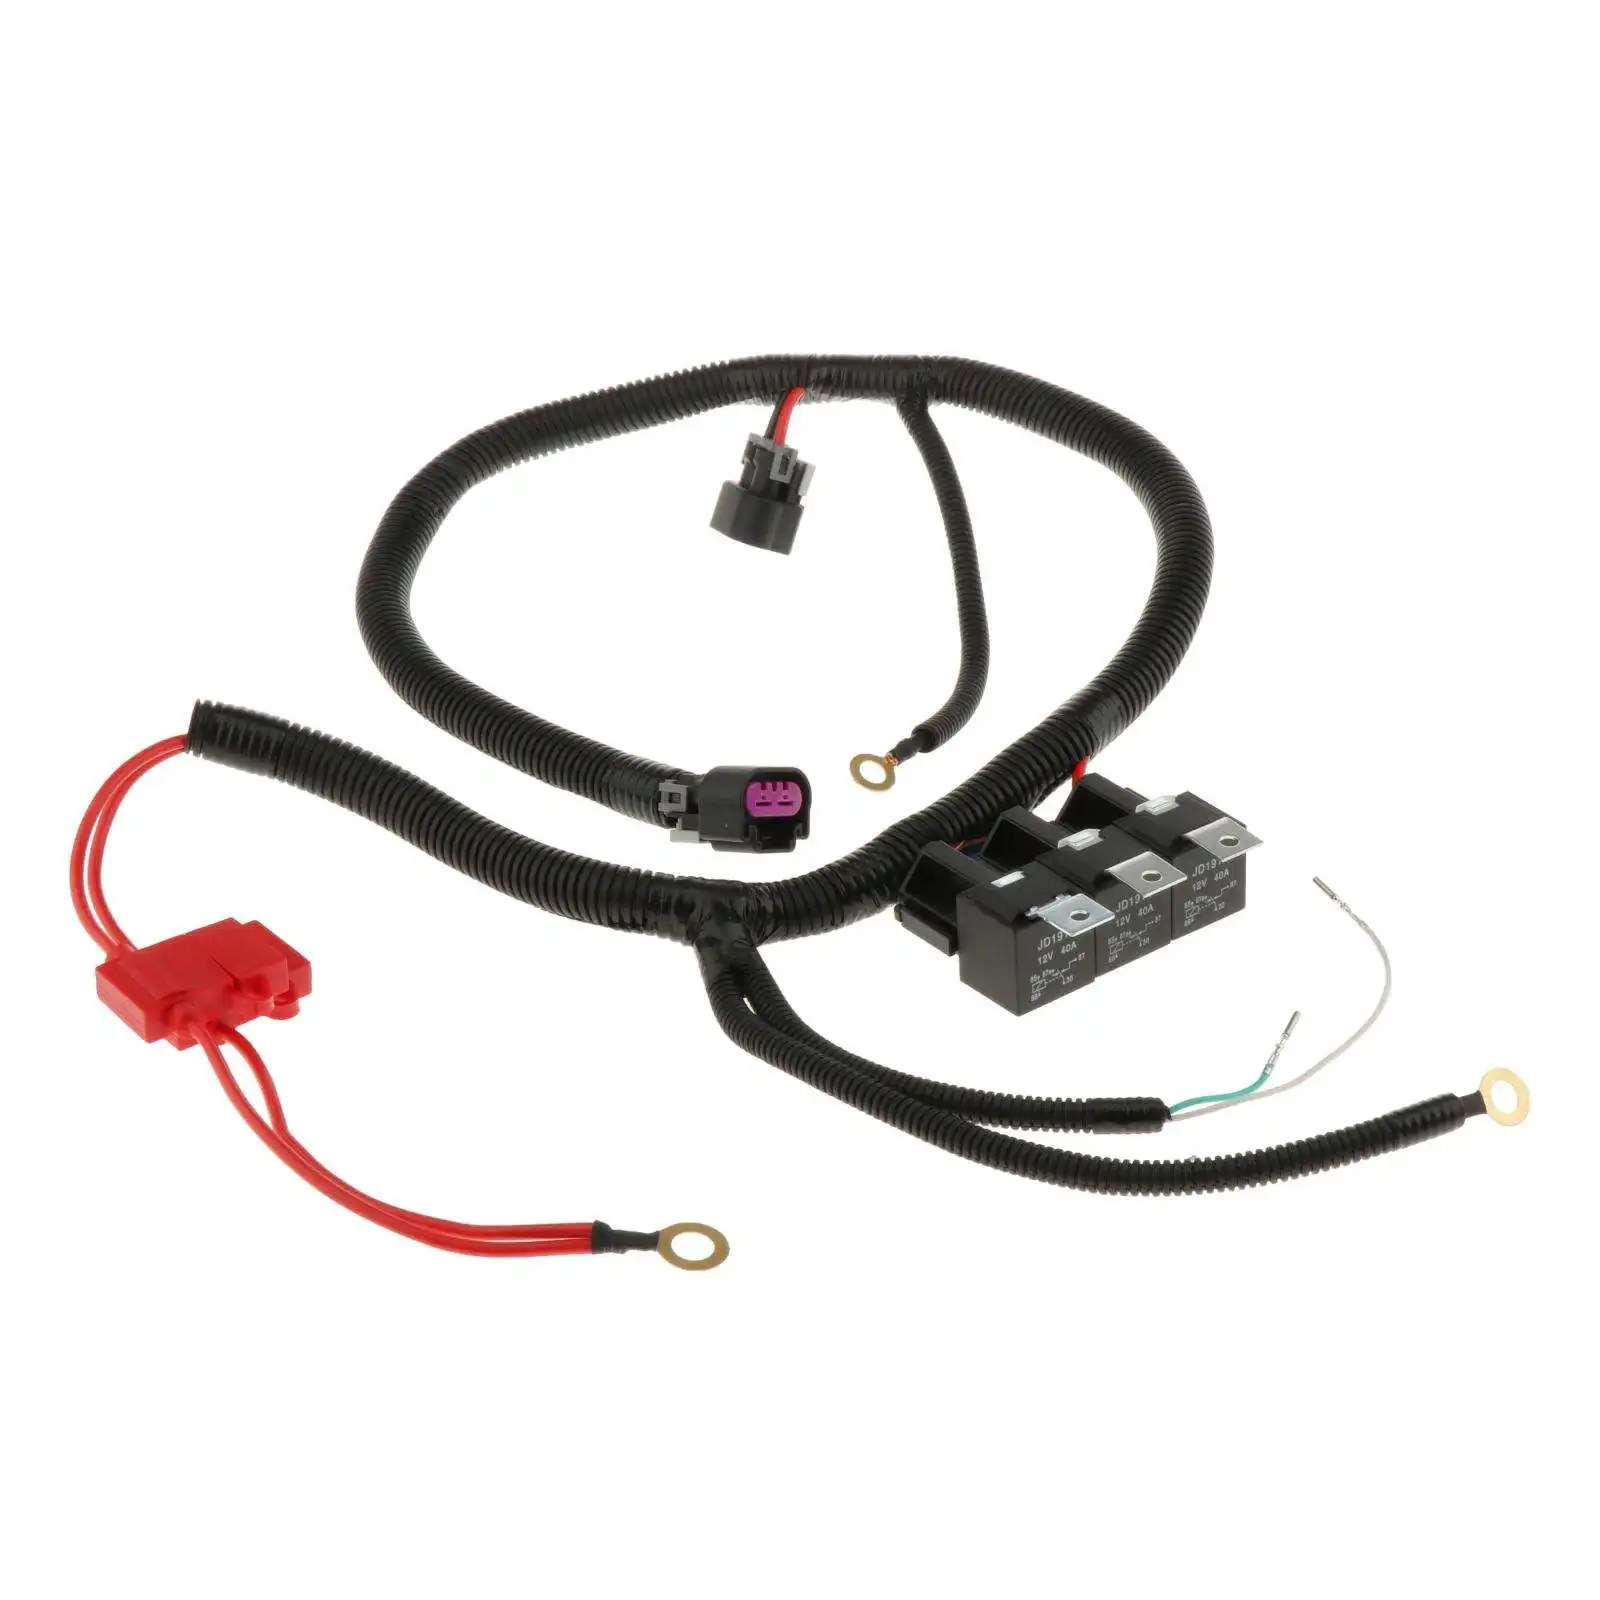 200mm Practical Electric Cooling Fan Wire Harness Kit, Dual Electric Fan Upgrade Wiring Harness